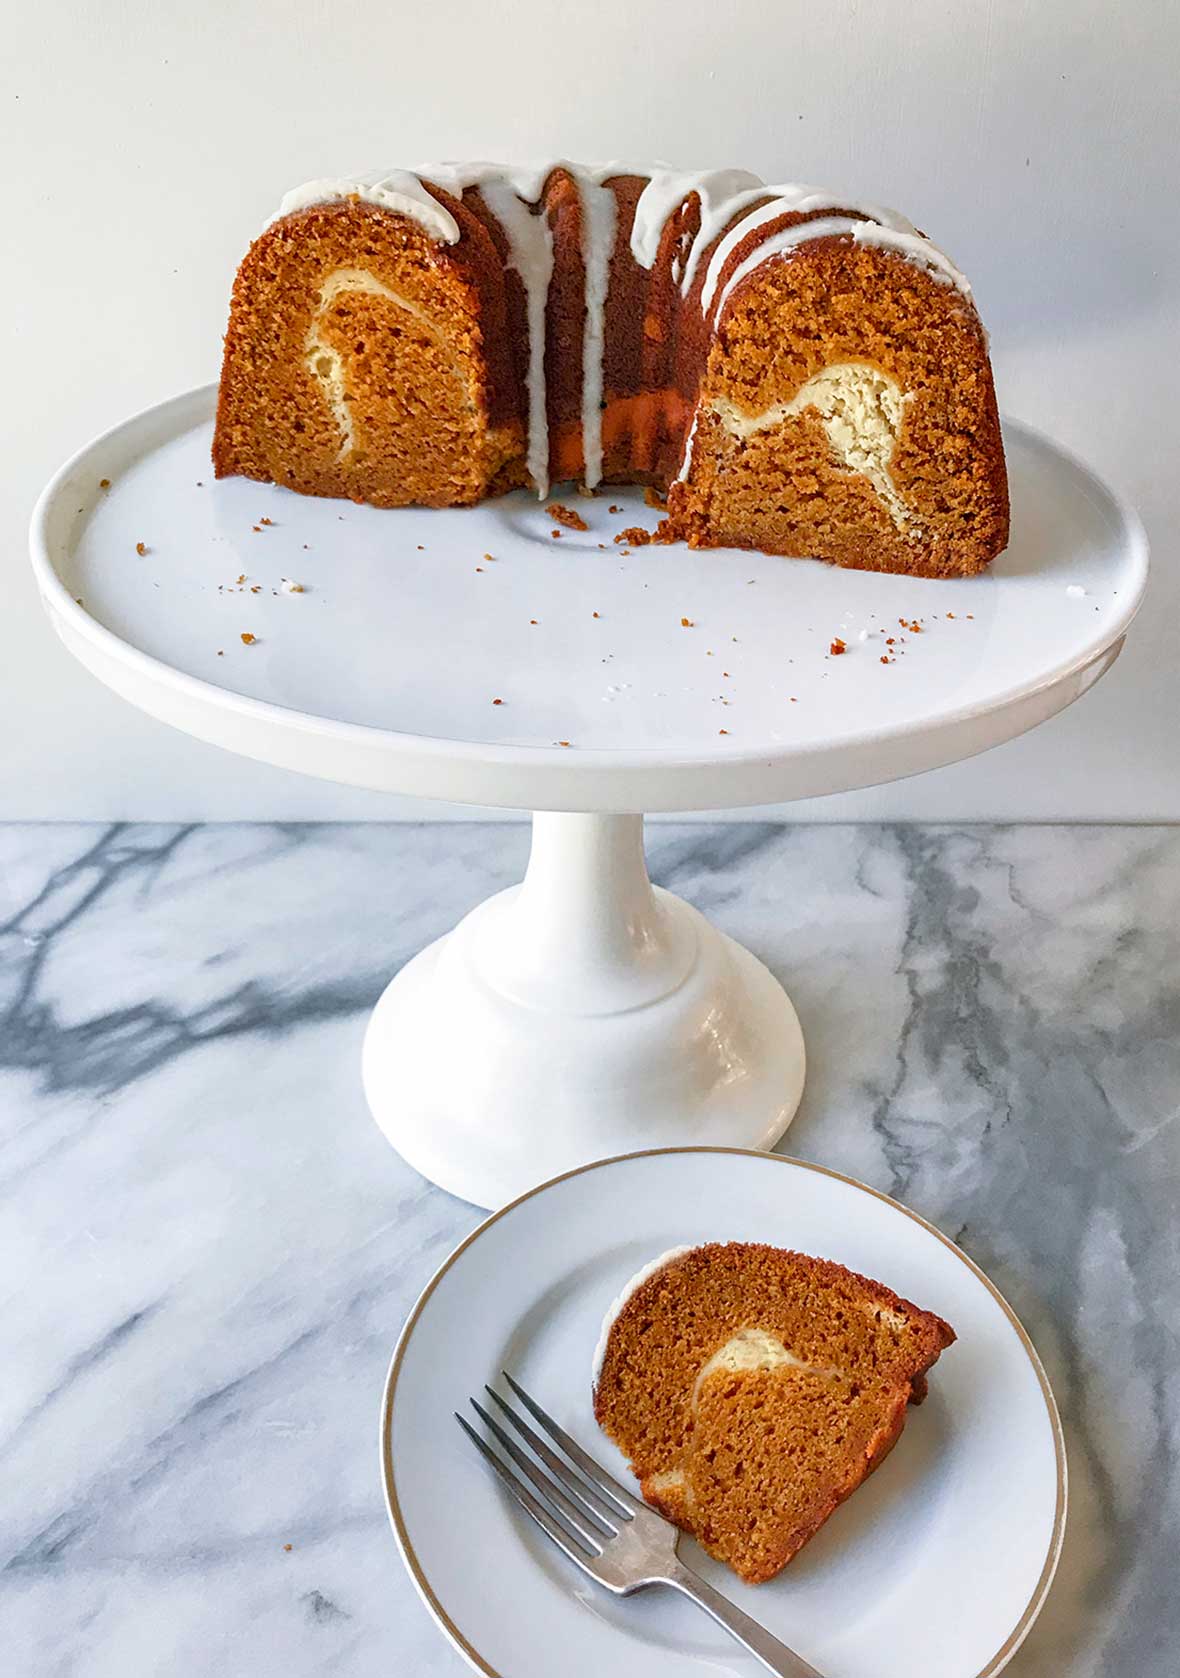 Half of a glazed pumpkin pound cake with a swirl of cream cheese filling inside on a cake stand, a piece on a plate nearby